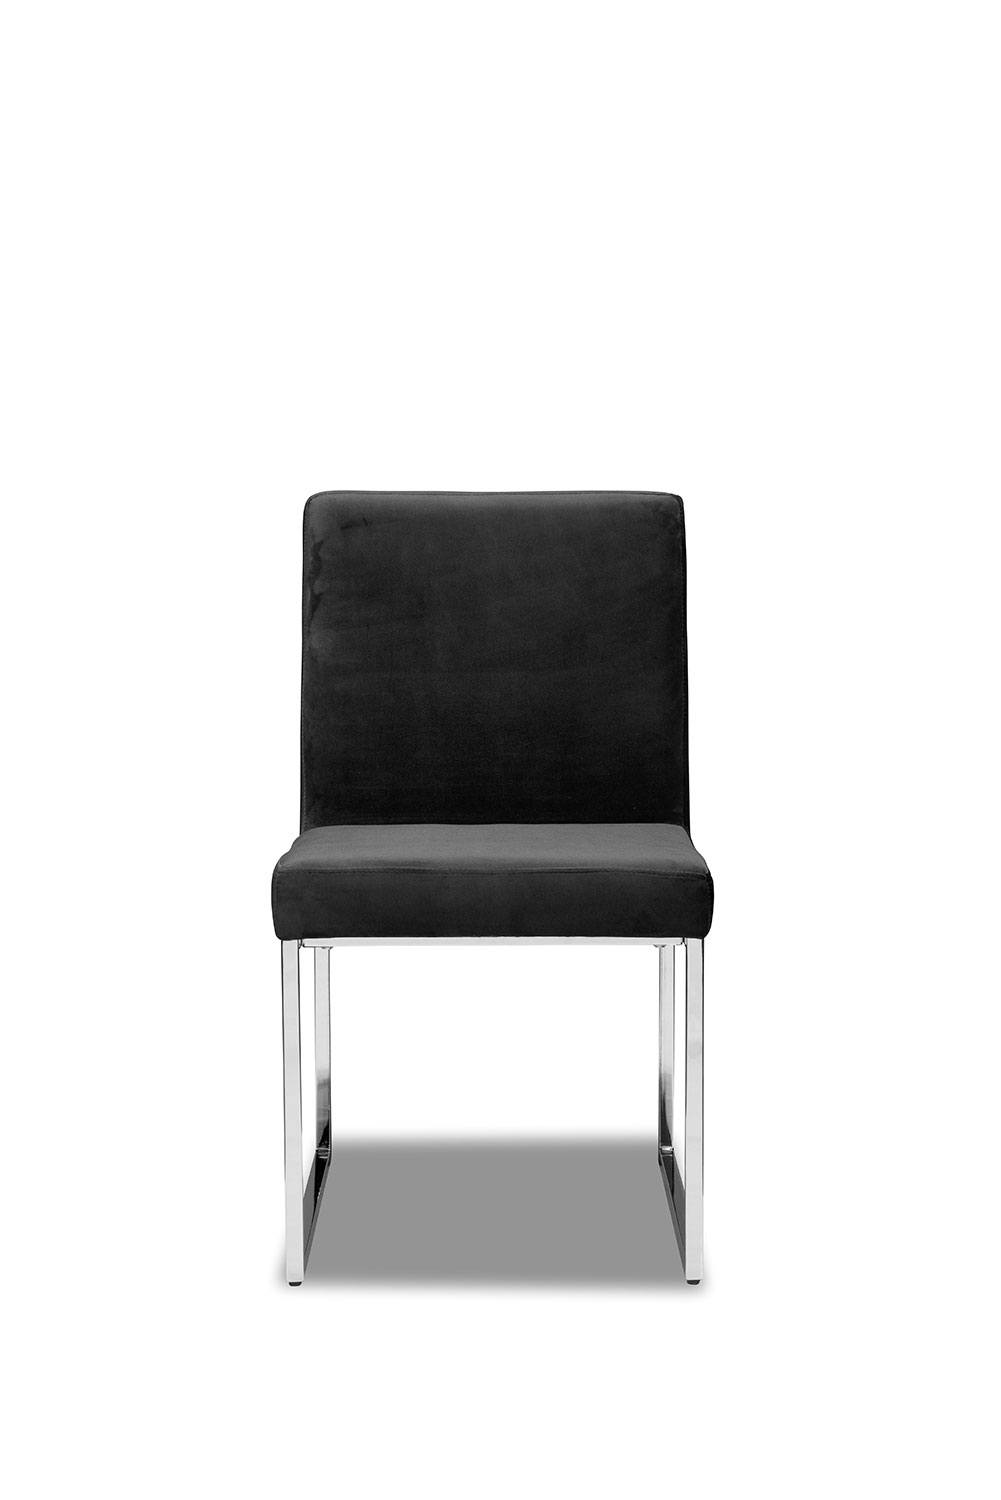 Delray Dining Chair - Black/Chrome